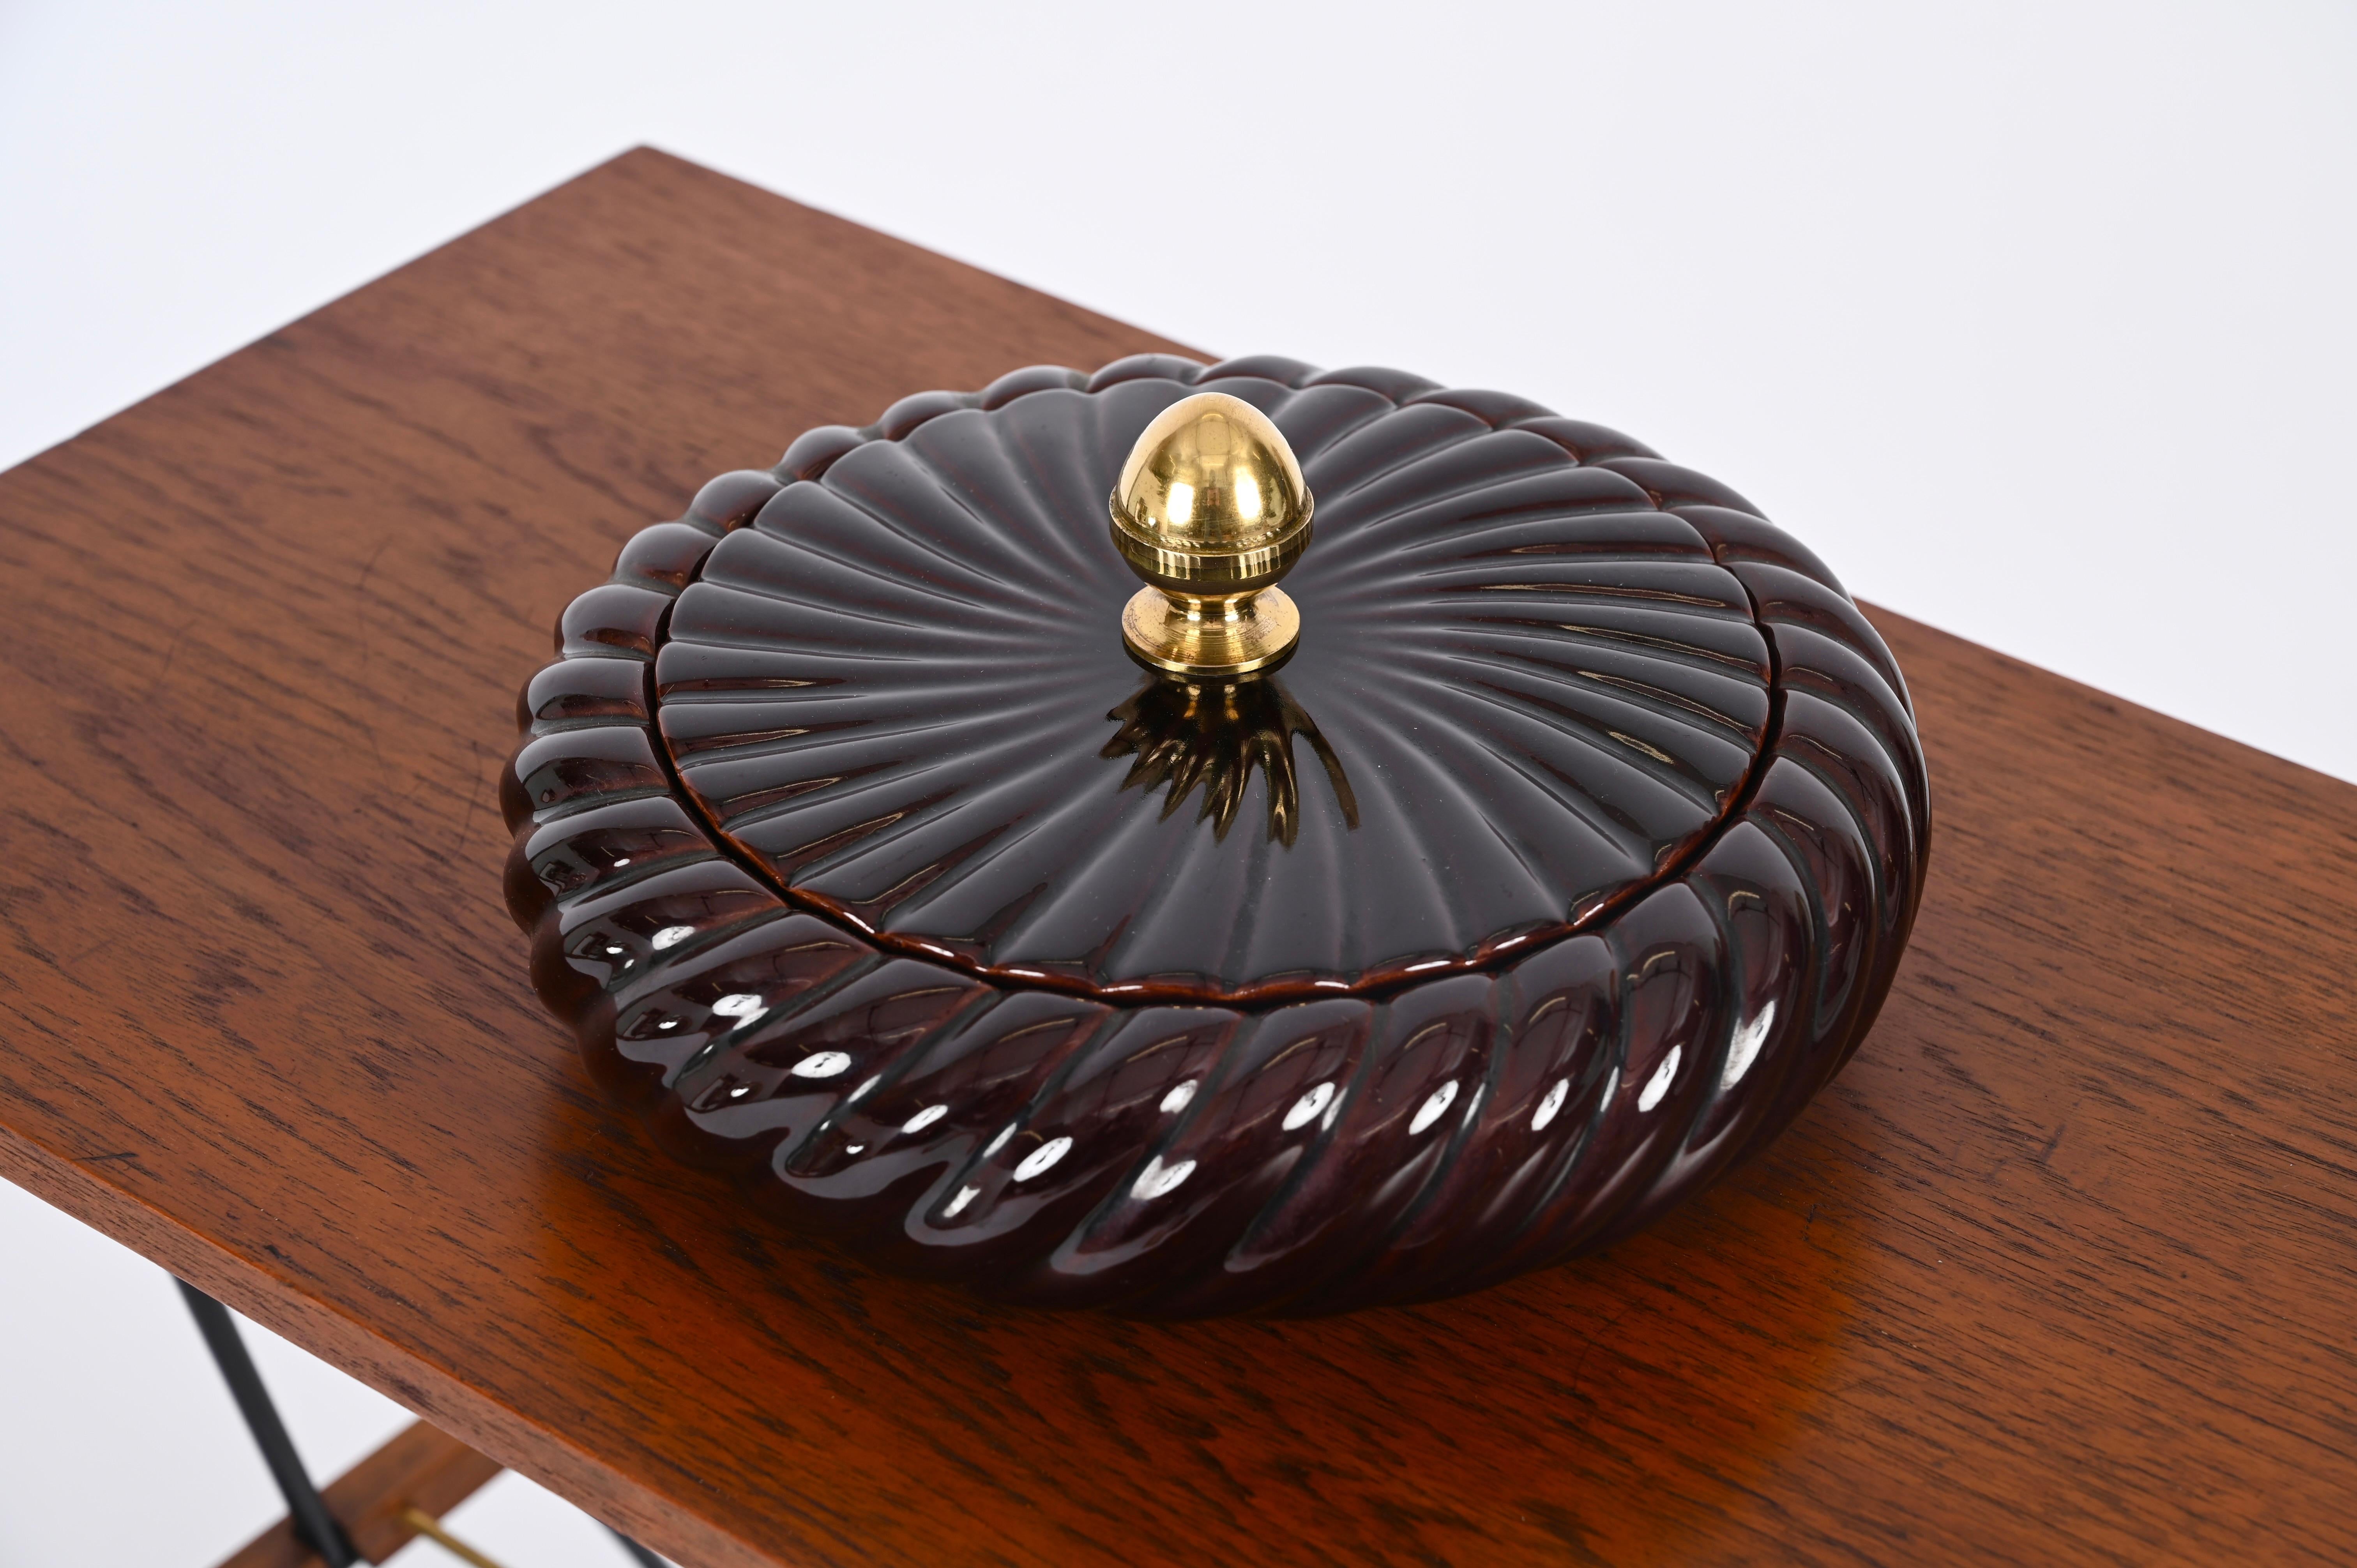 Hand-Crafted Tommaso Barbi Brown Ceramic and Brass Decorative Box or Centerpiece, Italy 1970s For Sale